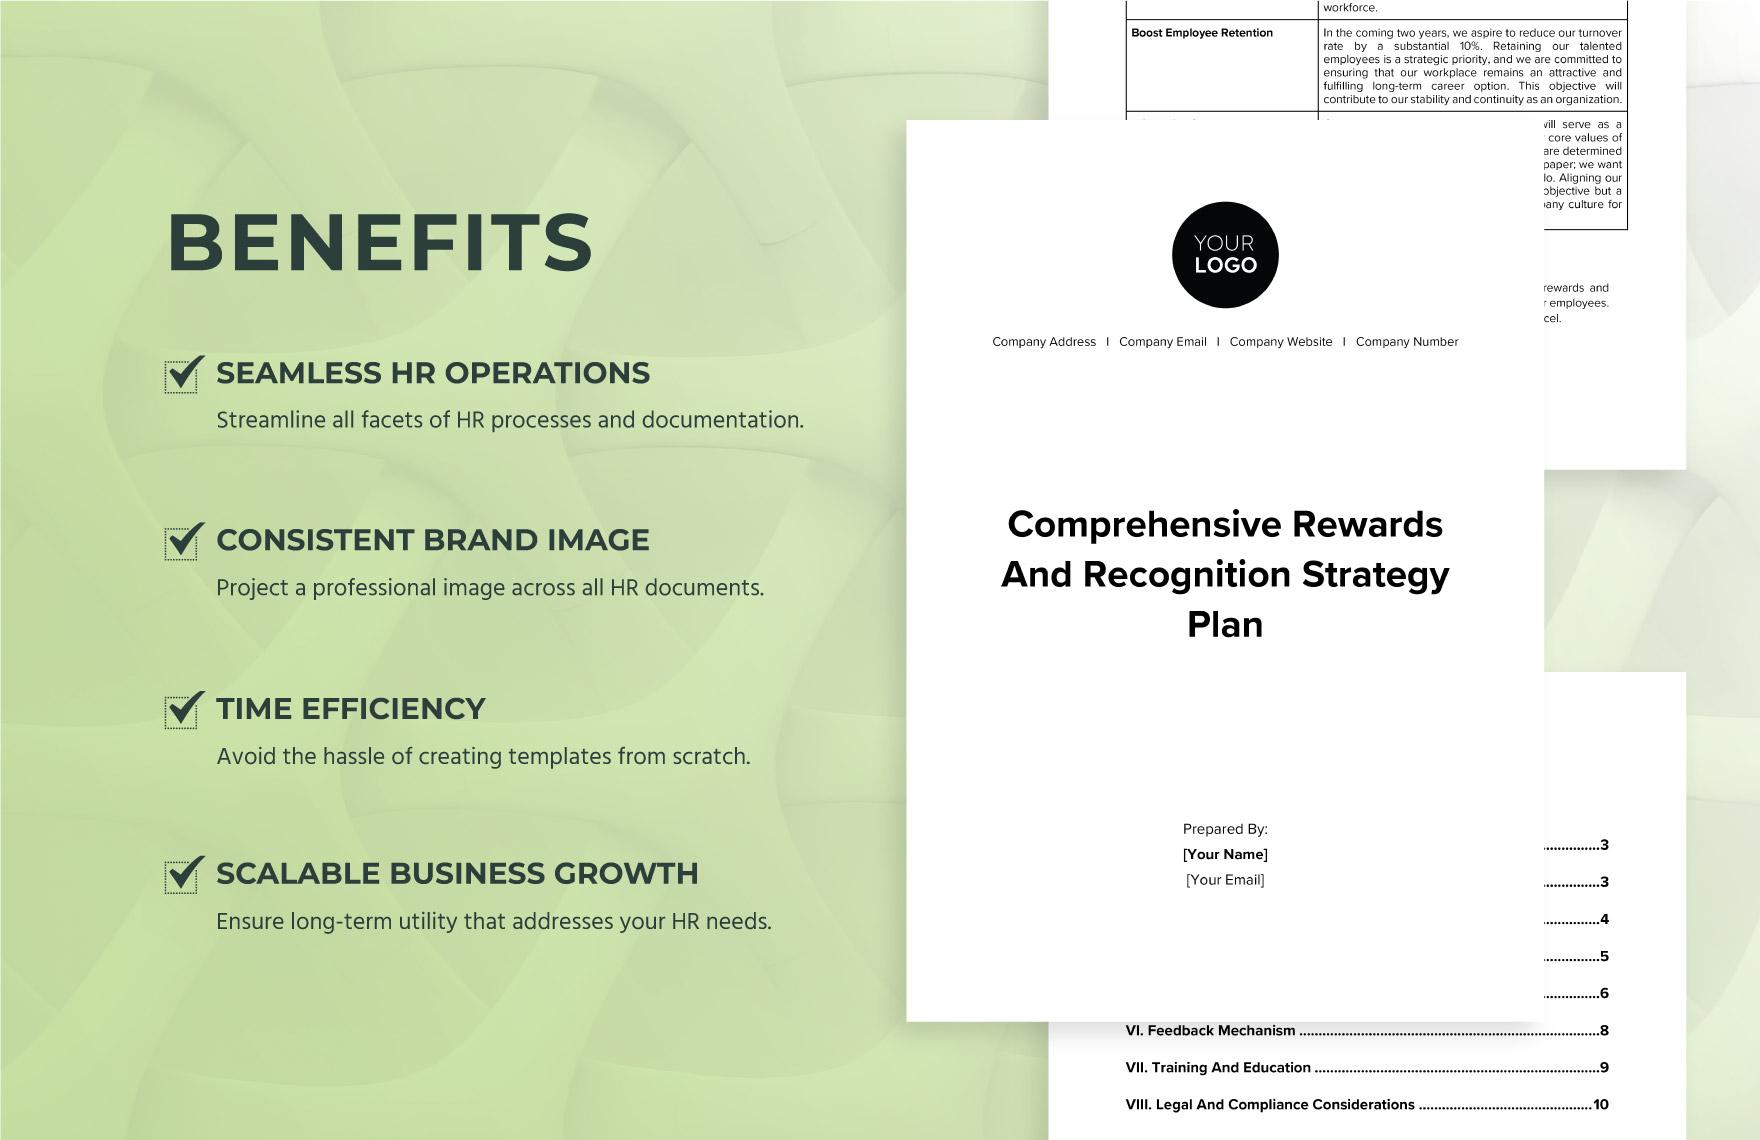 Comprehensive Rewards and Recognition Strategy Plan HR Template